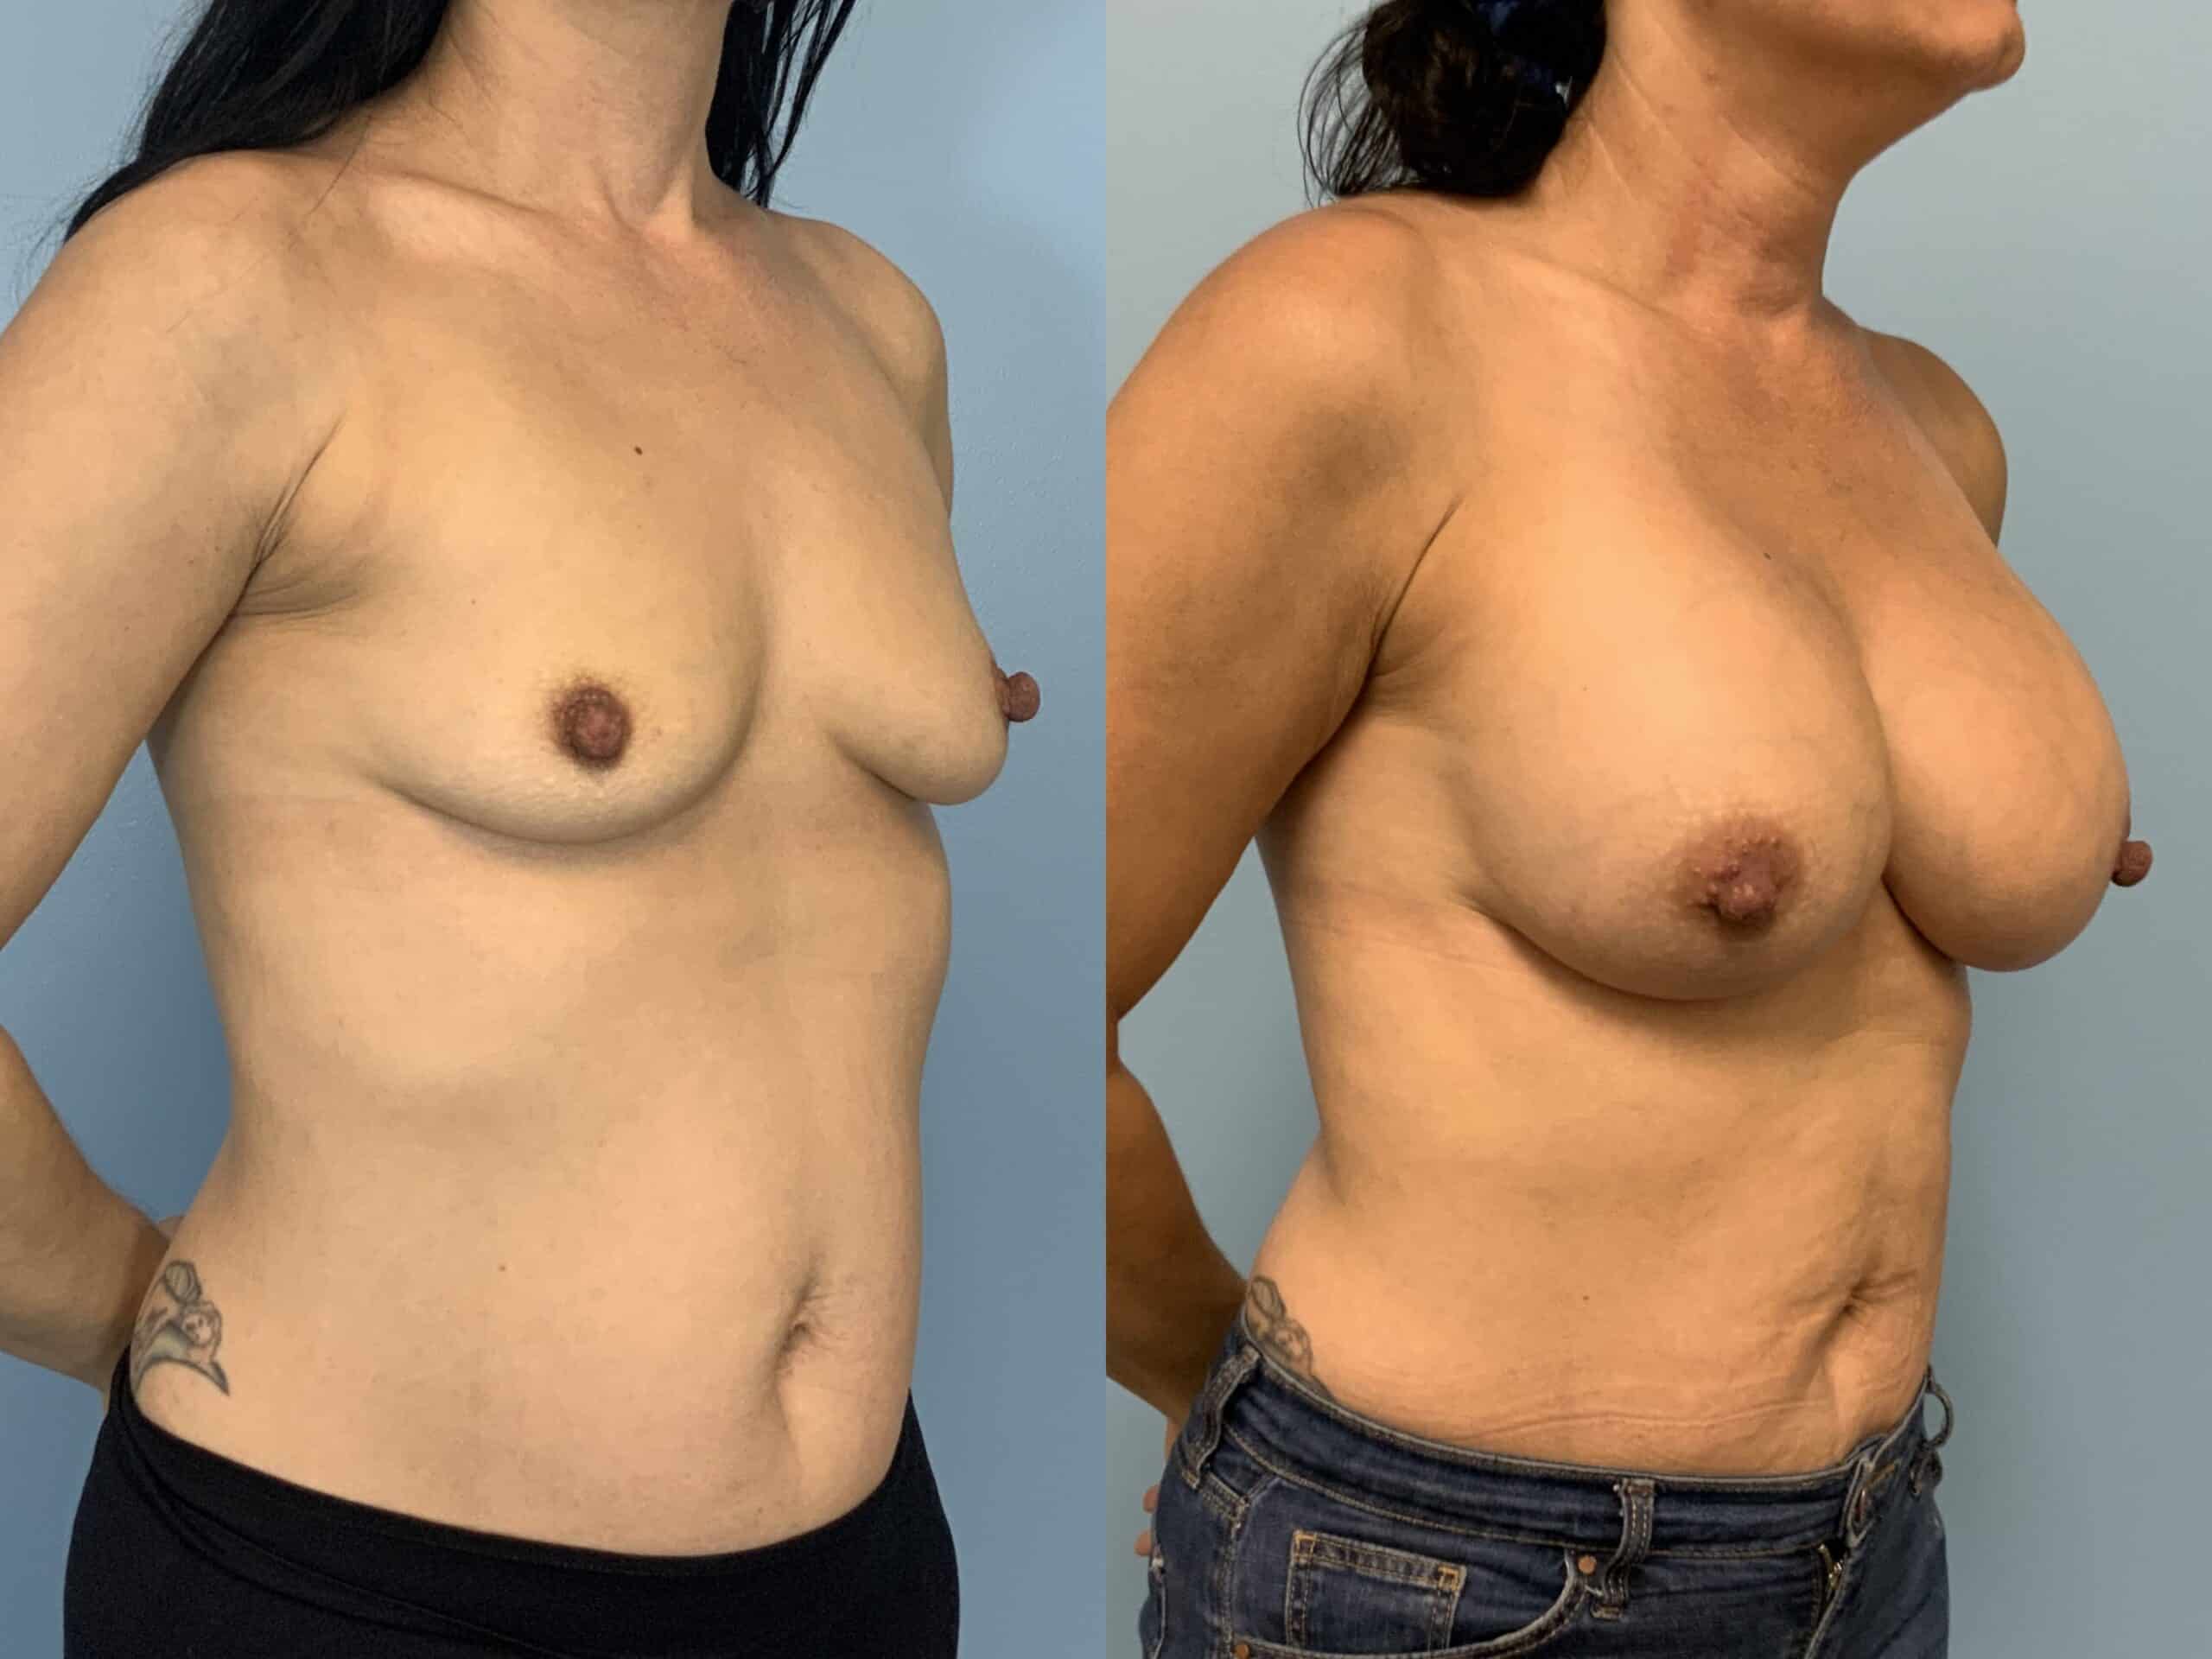 Before and after, Patient 2 mo post op from Breast Augmentation, Level III Muscle Release, Galaflex Reinforcement procedures performed by Dr. Paul Vanek